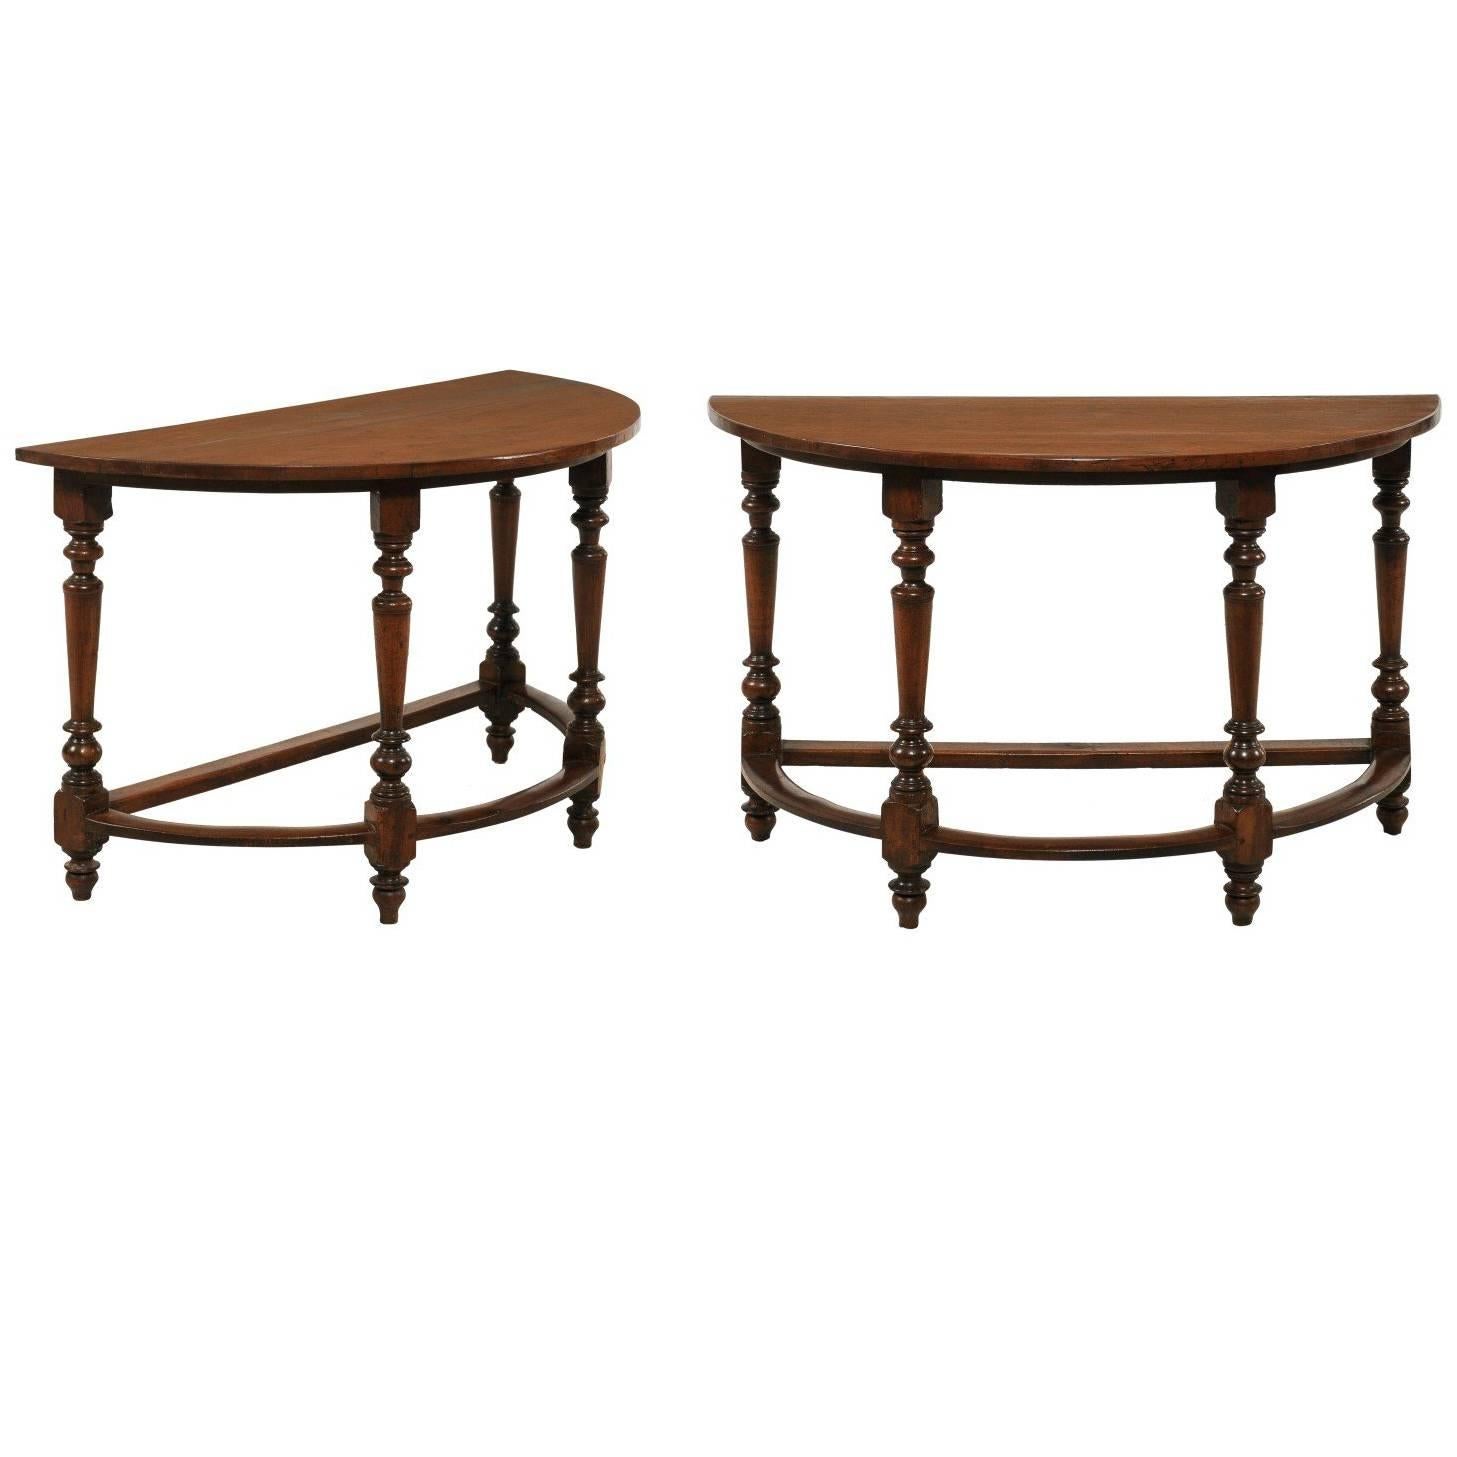 Pair of Large 1820s Italian Walnut Demilune Console Tables with Turned Legs